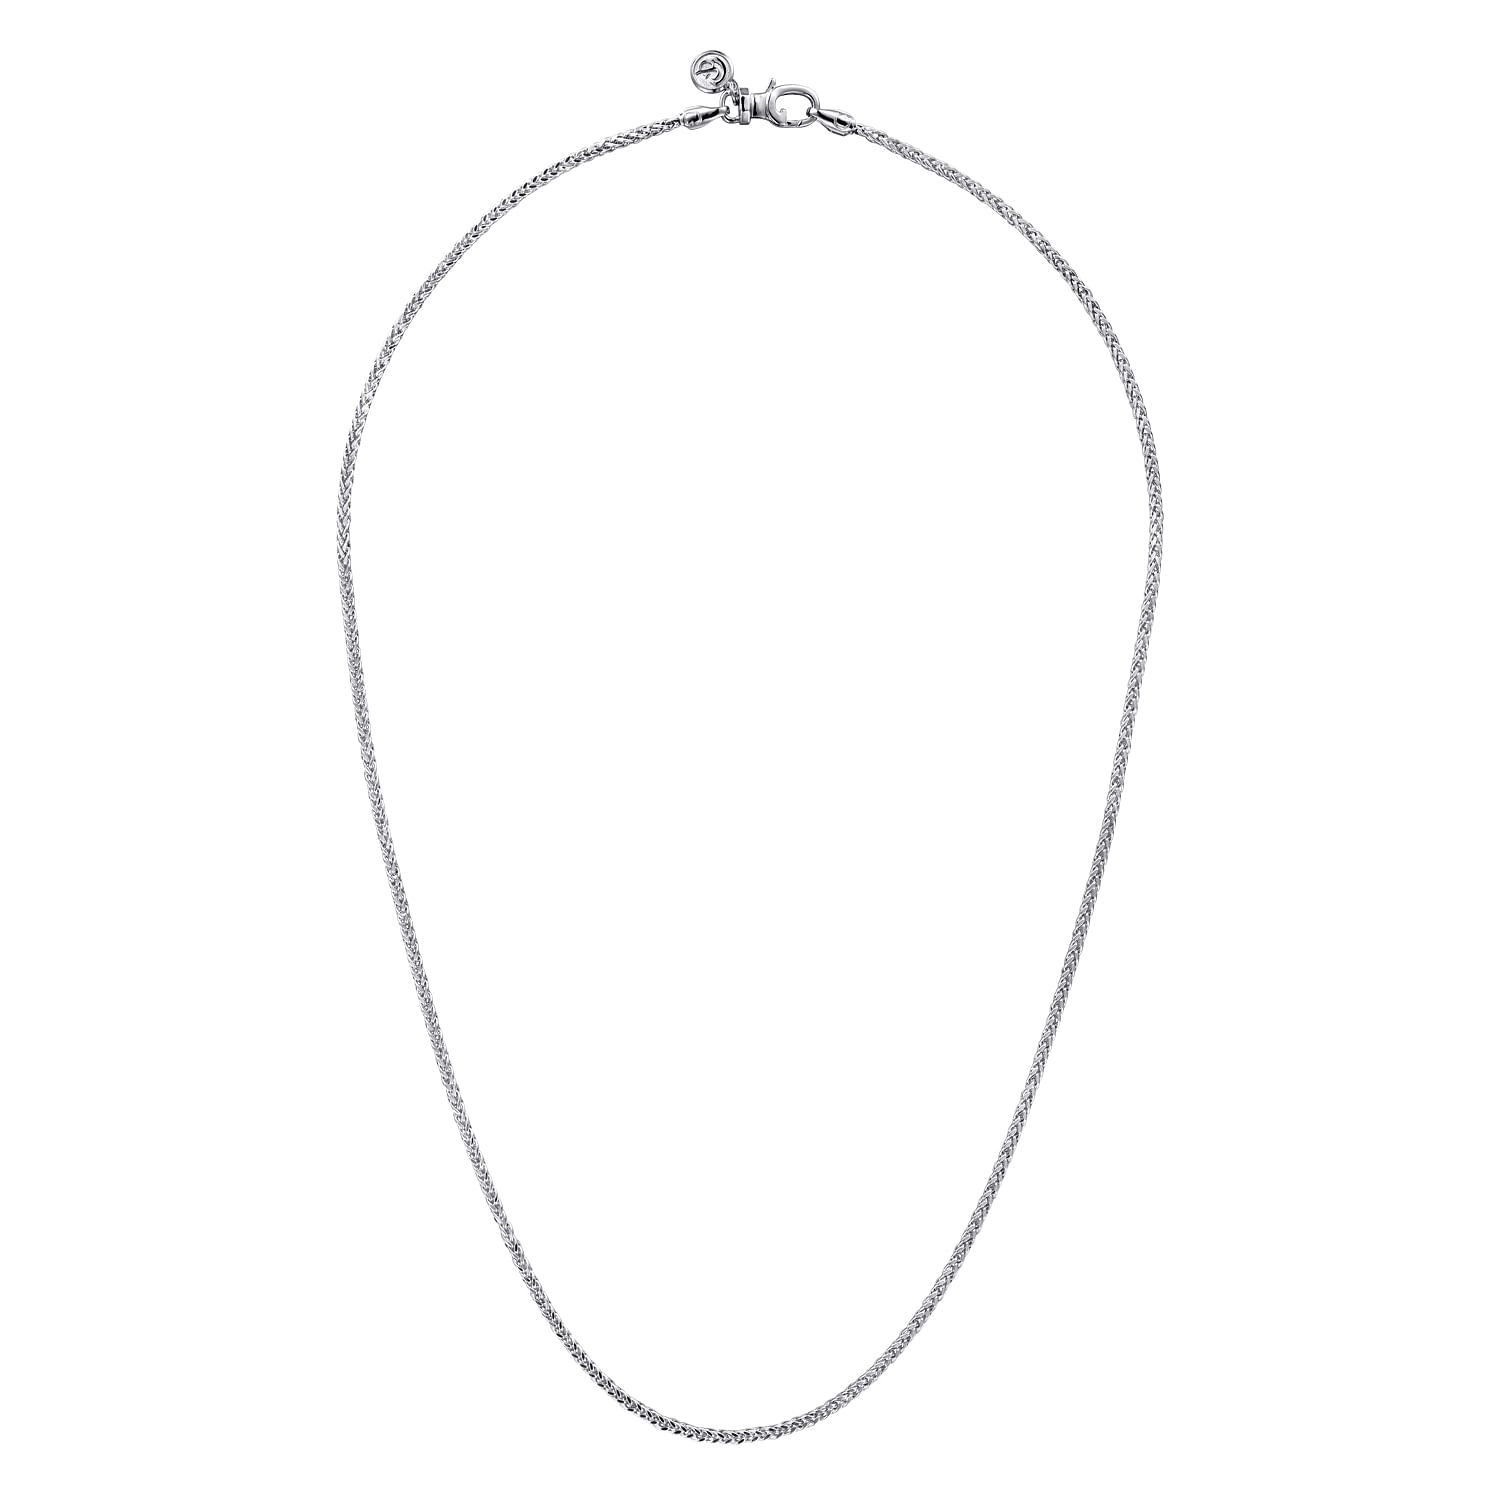 20 Inch 925 Sterling Silver Men's Wheat Chain Necklace 